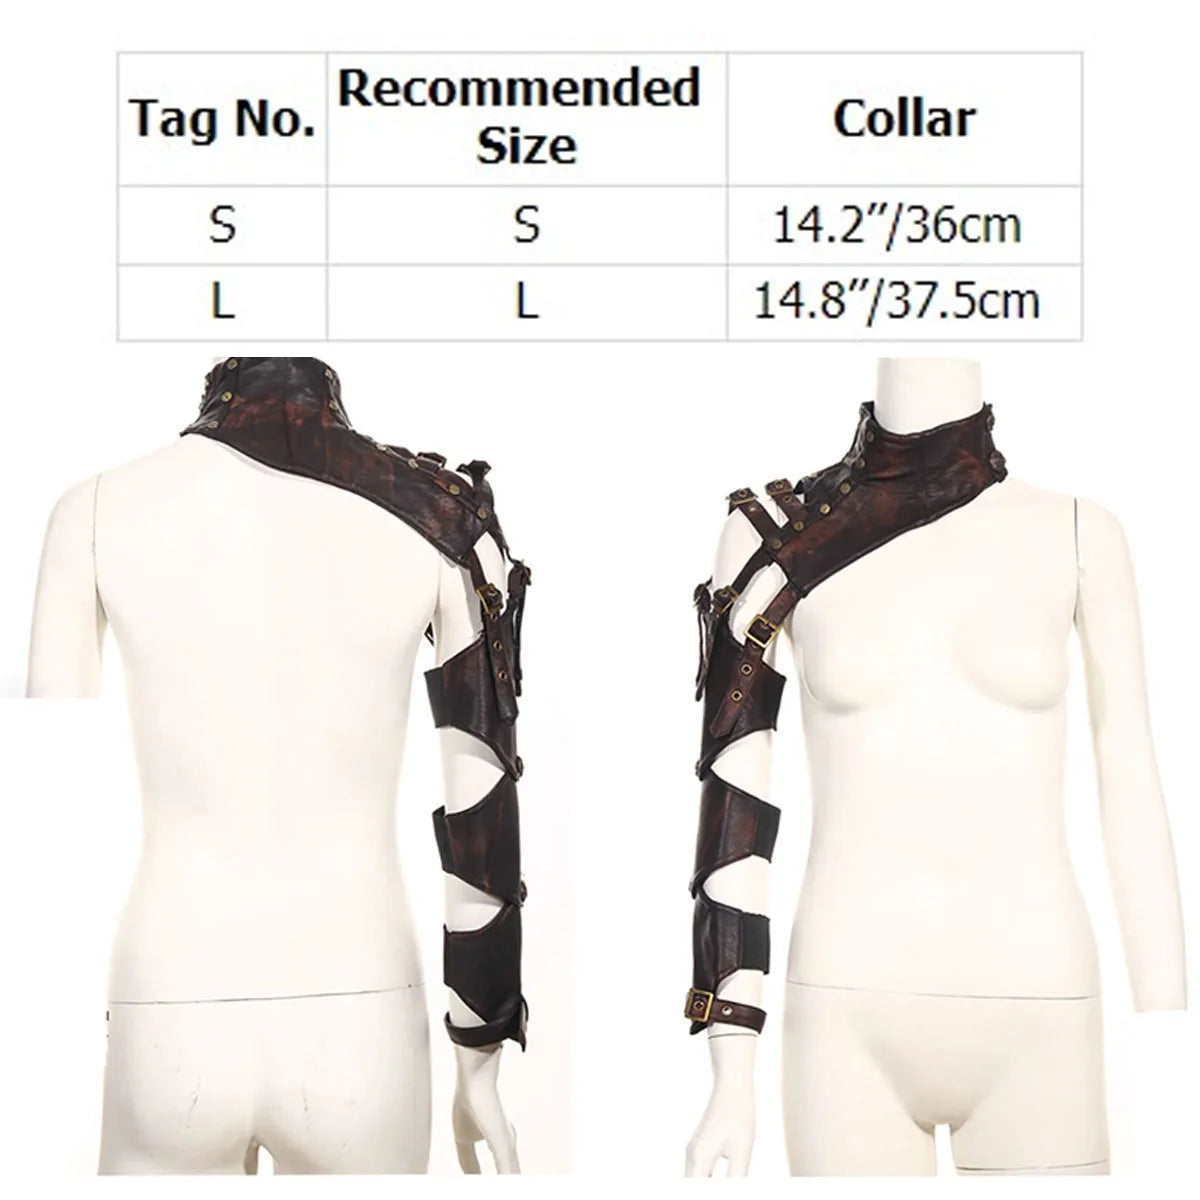 Two mannequins display a Maramalive™ Adult Steampunk Retro Leather Arm Sheath Armor Costume One Shoulder Faux Leather Corset Warmer Bolero Shrug Jacket Coffee, shown from the front and back. A size chart above indicates two sizes: S with a 14.2"/36cm collar and L with a 14.8"/37.5cm collar—perfect for adding an edgy touch to cosplay costumes or punk outfits.
